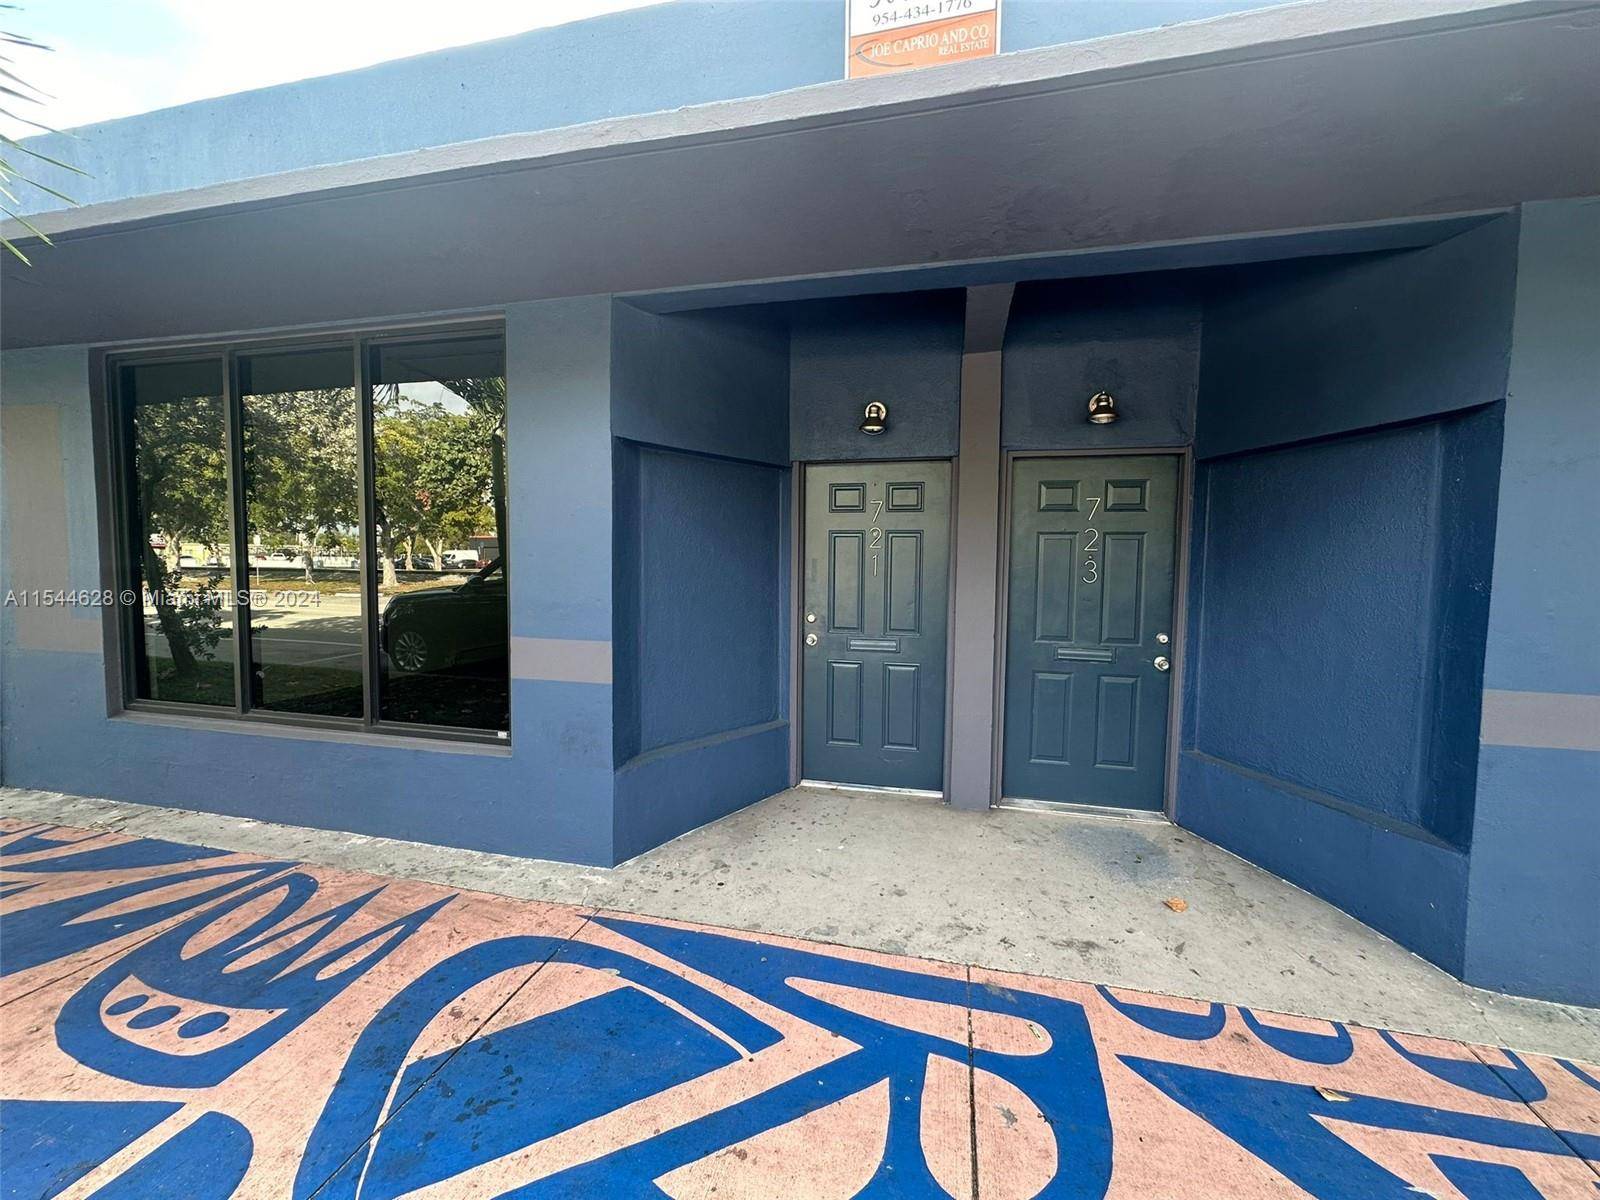 Welcome to this exceptional commercial space in East Hollywood, FL, Situated facing Dixie Hwy in a mixed use district, this office space boasts a prime location with high visibility.